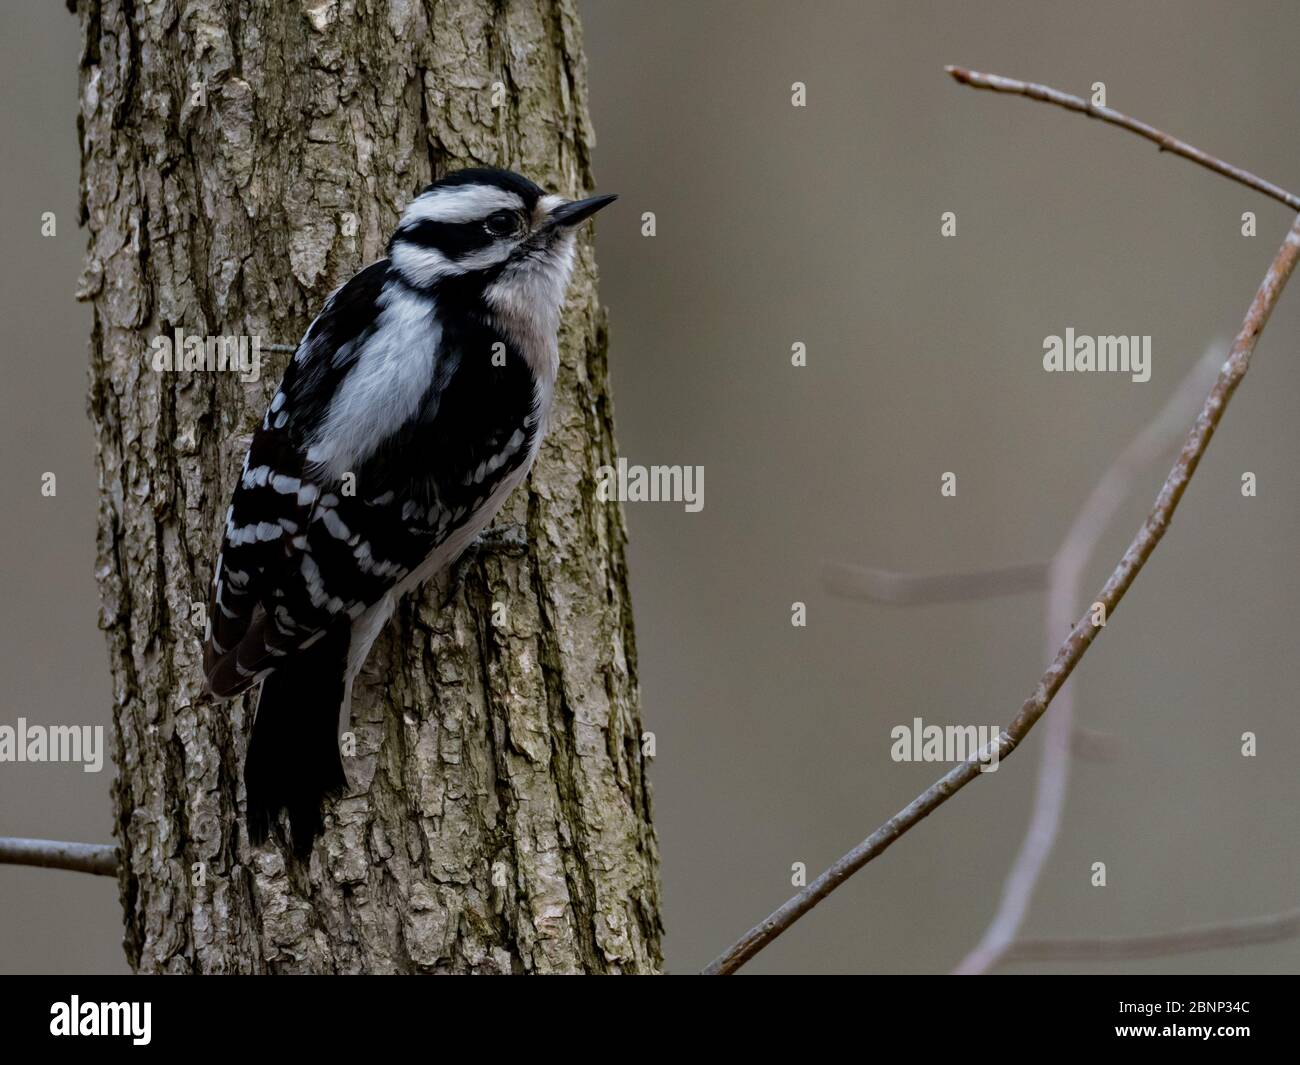 Downy Woodpecker Dryobates Pubescens A Common Bird In The Woodlands Of Ohio In The United States Stock Photo Alamy,Rose Breasted Cockatoo